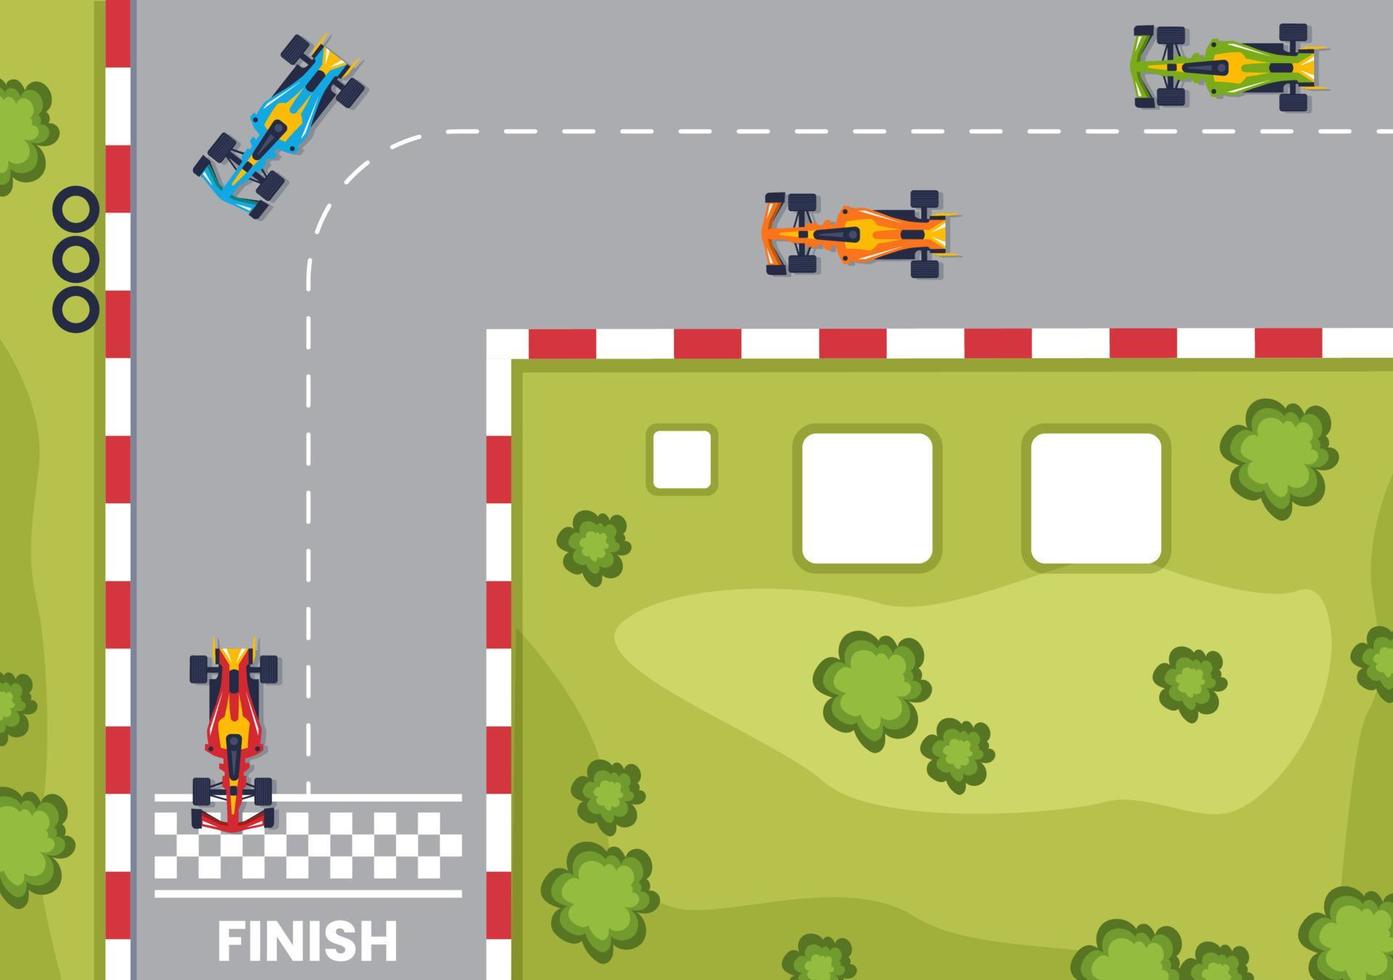 Formula Racing Sport Car Reach on Race Circuit the Finish Line Cartoon Illustration to Win the Championship in Flat Style Design vector